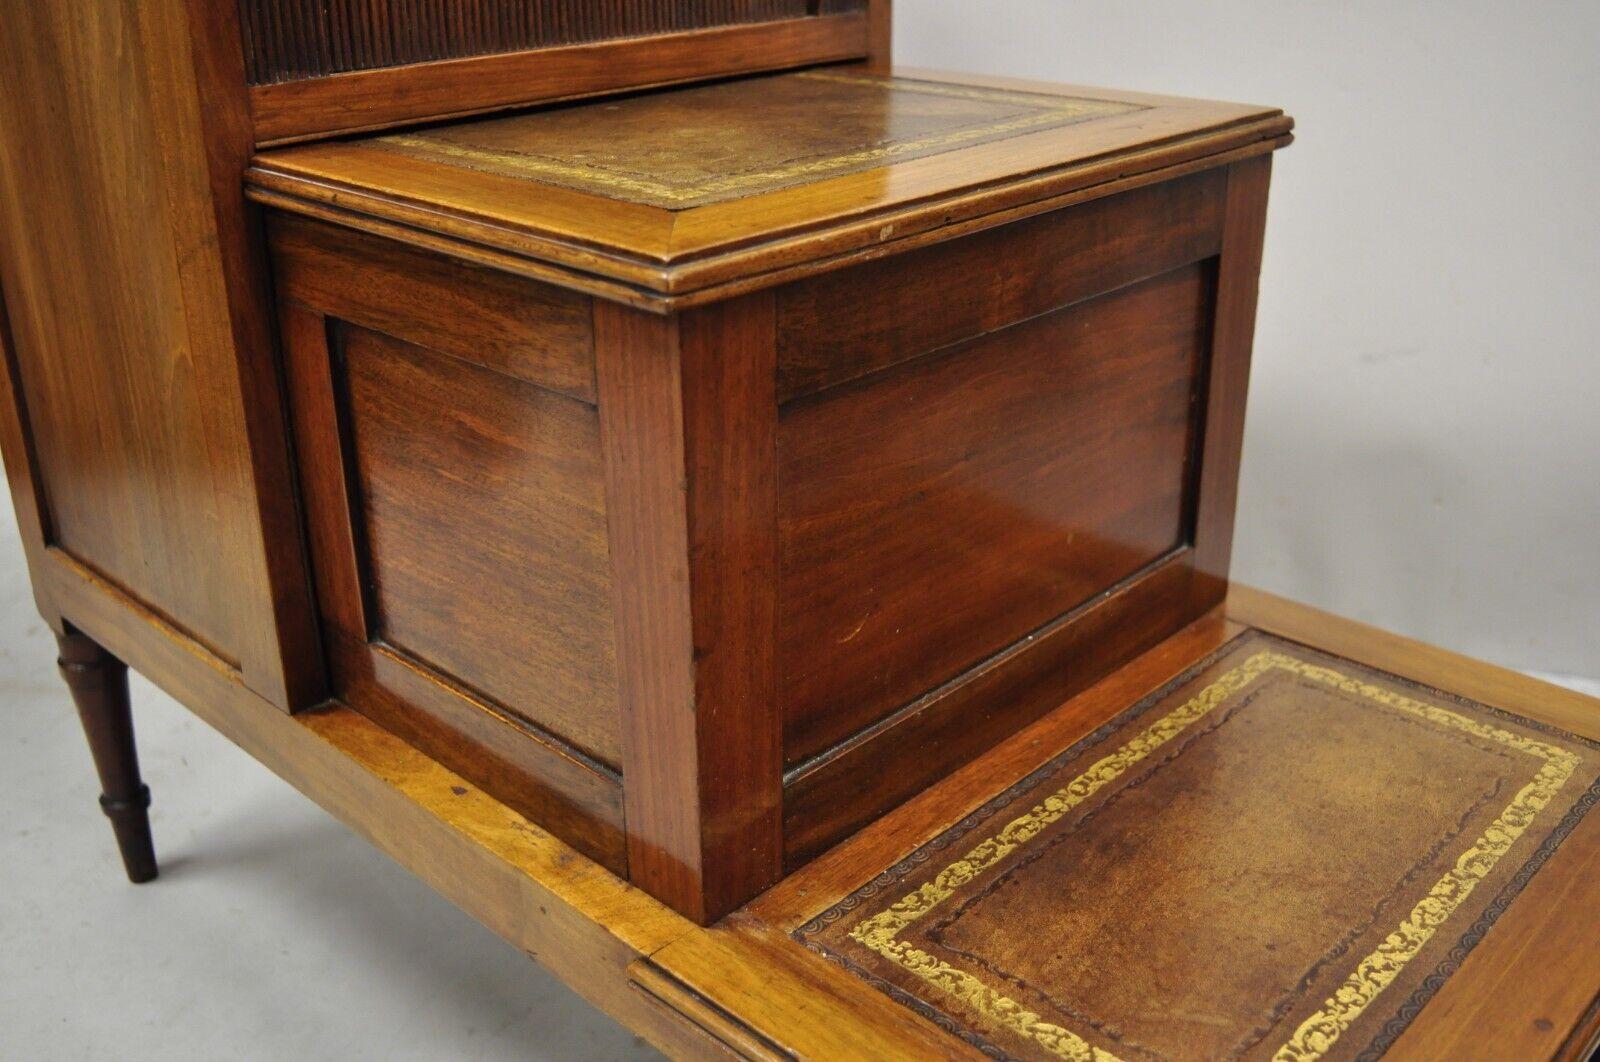 Antique English Regency Leather Top 3 Tier Side Table with Hidden Storage In Good Condition For Sale In Philadelphia, PA